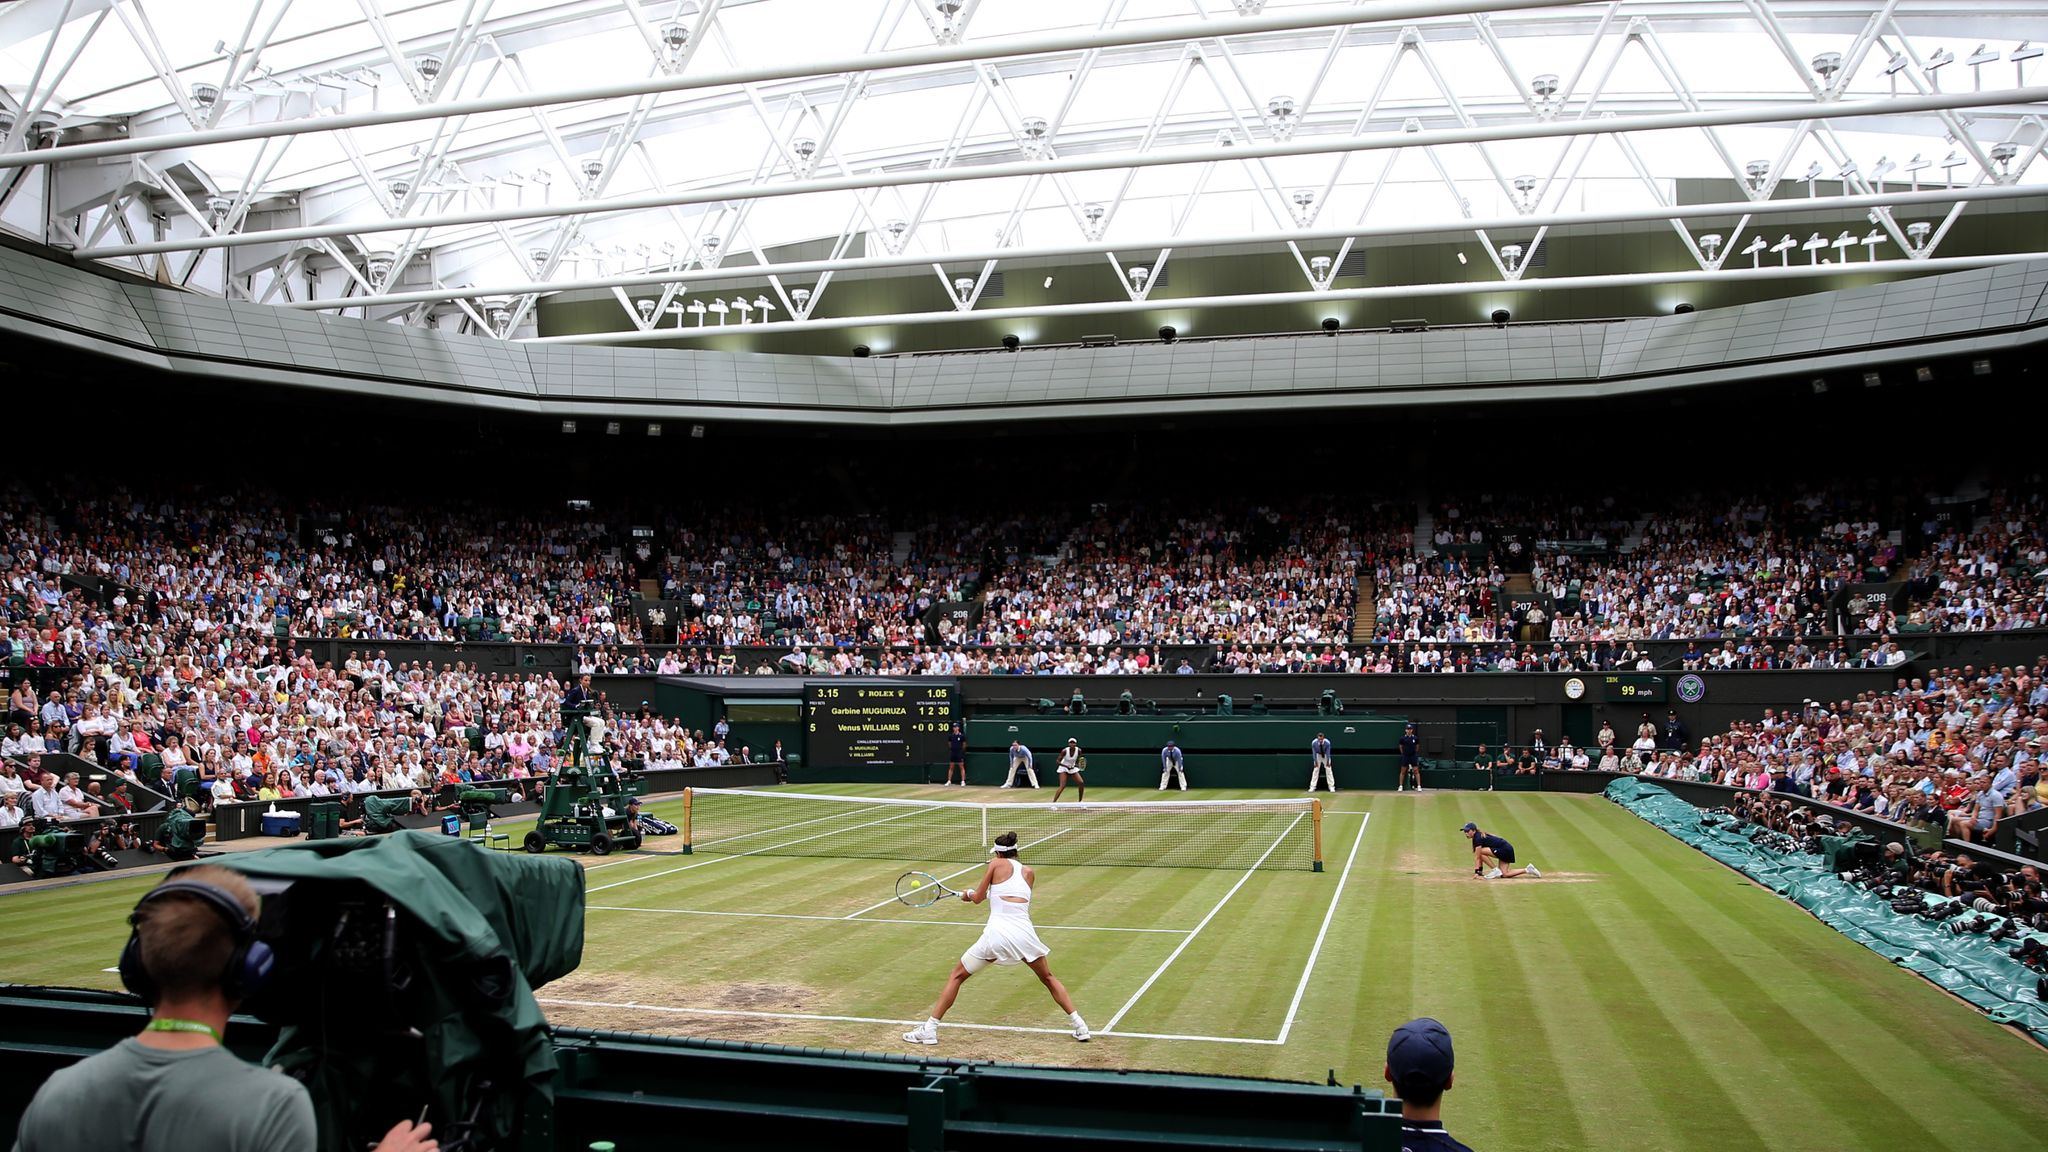 Wimbledon 2022 will see the introduction of play on Middle Sunday and